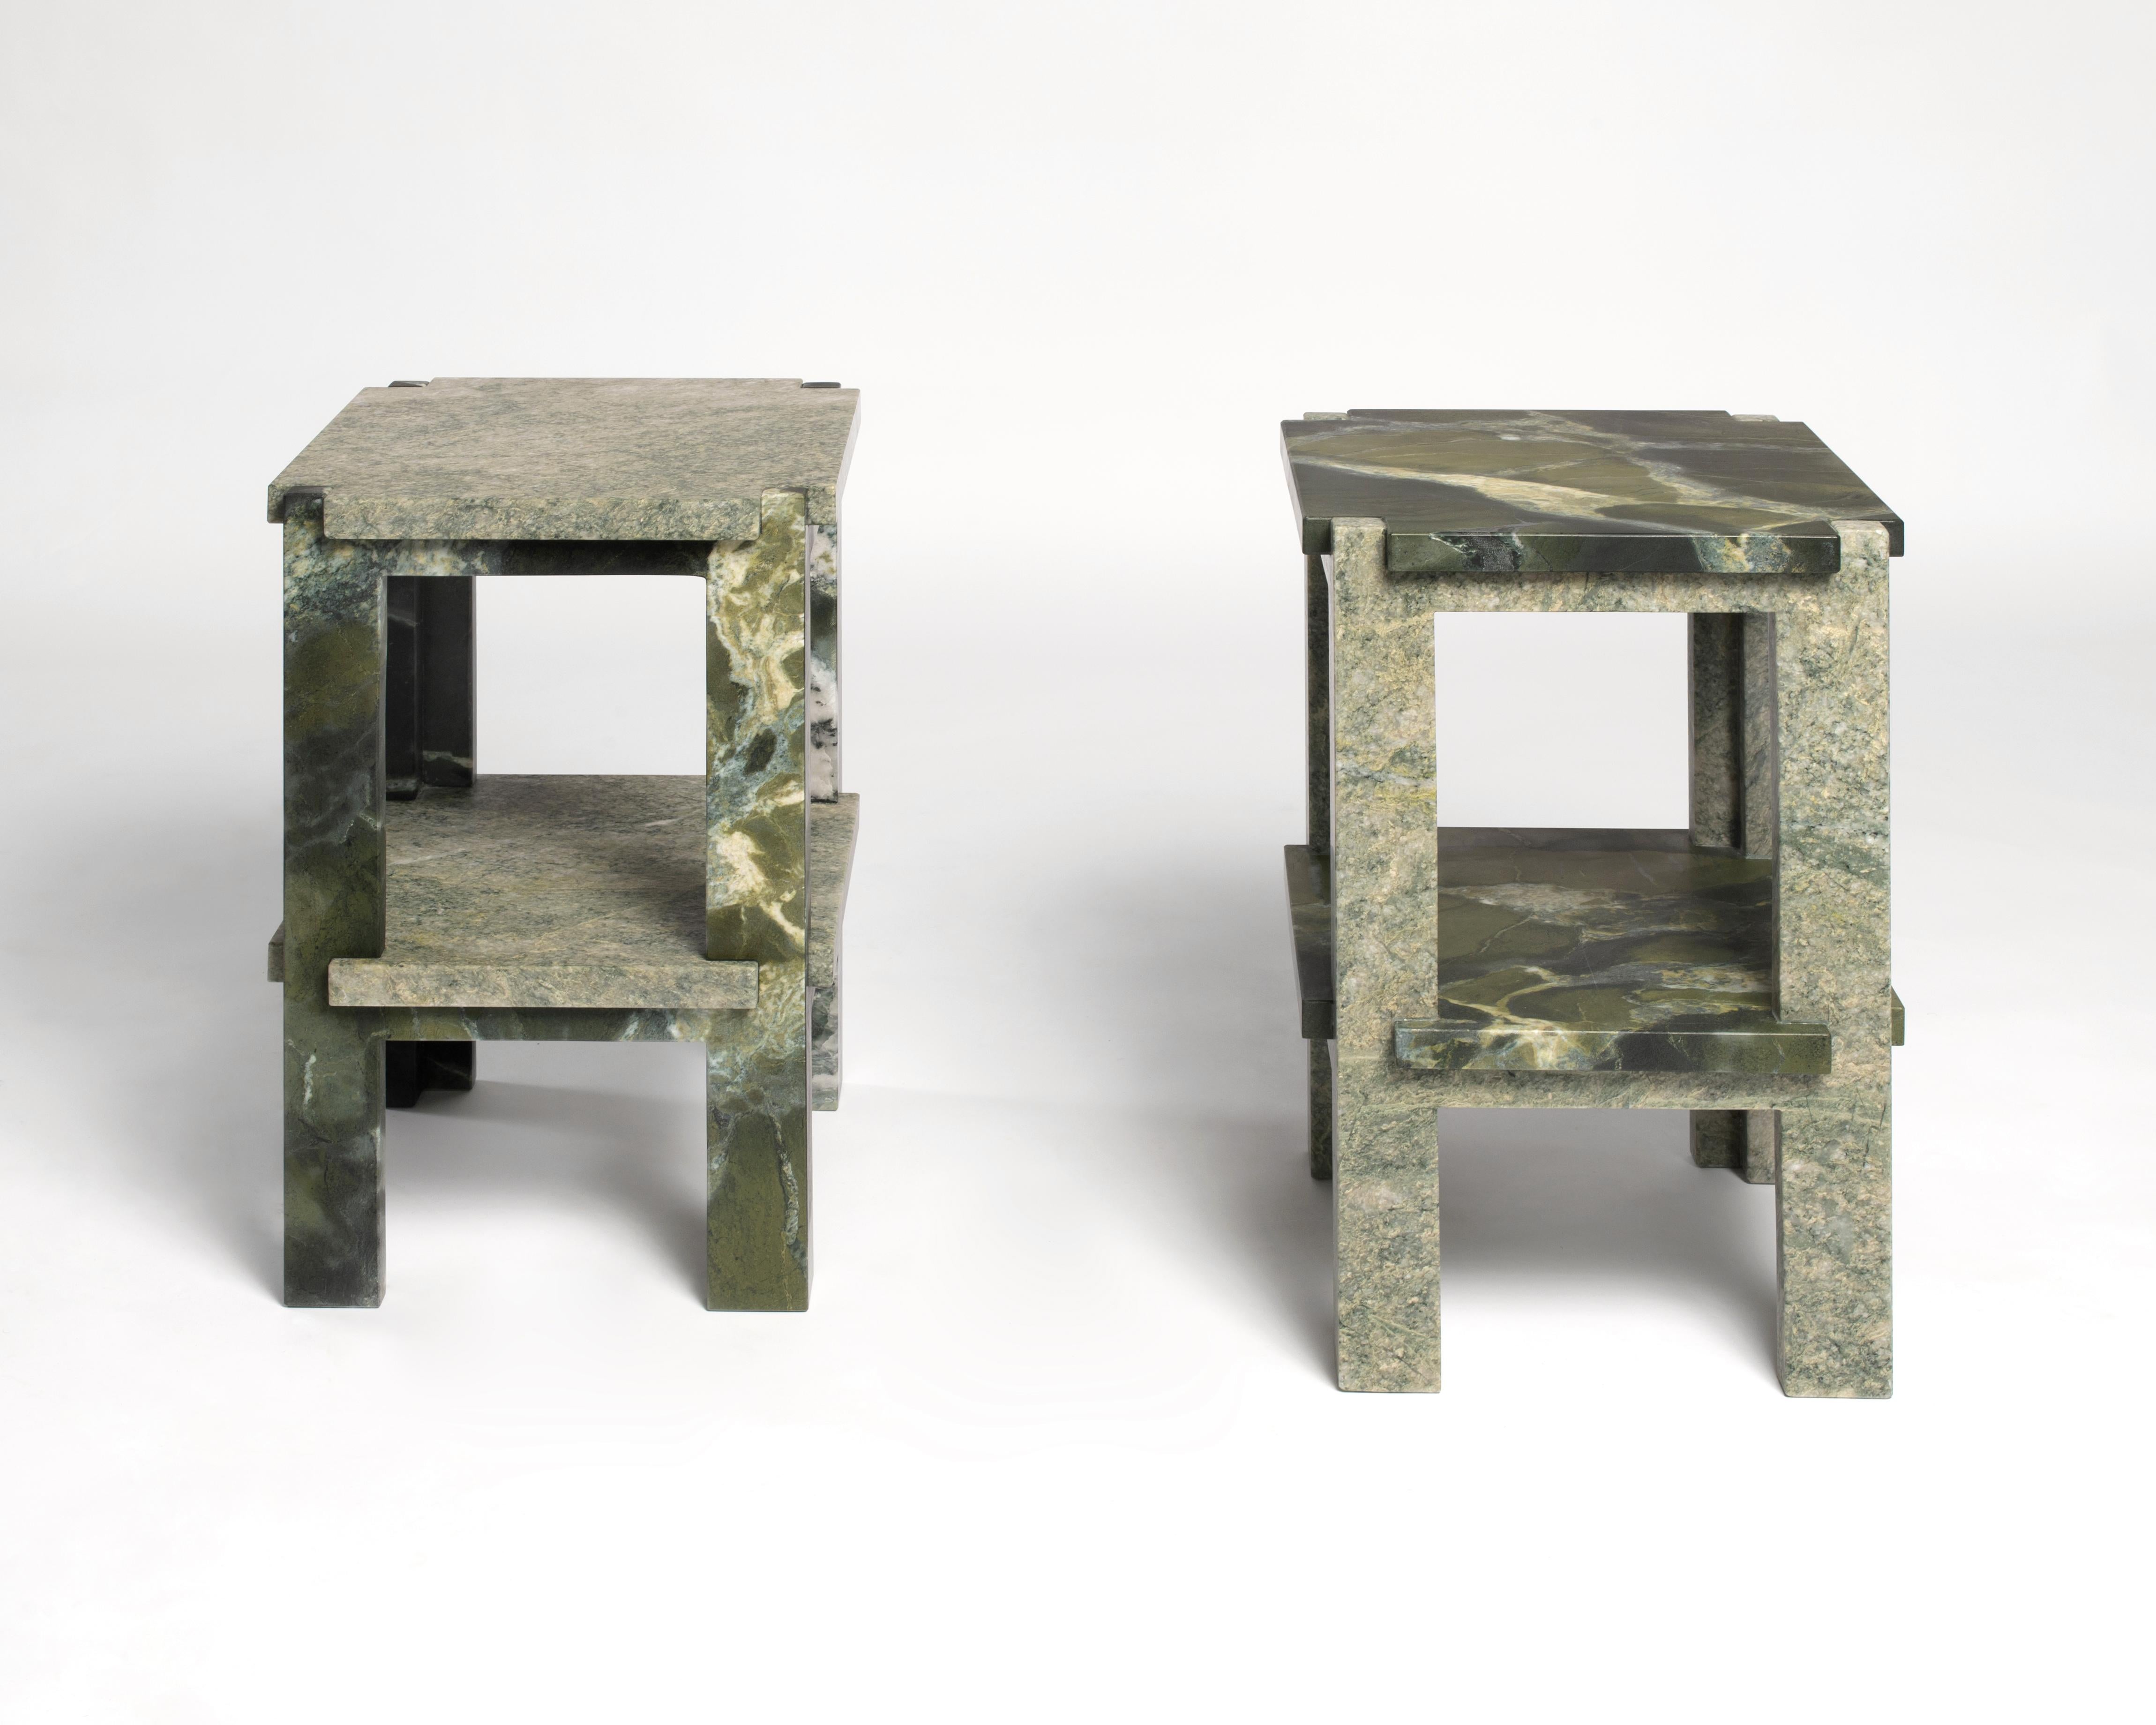 The Ostomachion Occasional Tables combine two different types of stone in unexpected harmony. Their interlocking parts are defined by inversion, alternating both shelf joints and typology. Each individual element of the tables is integral to their